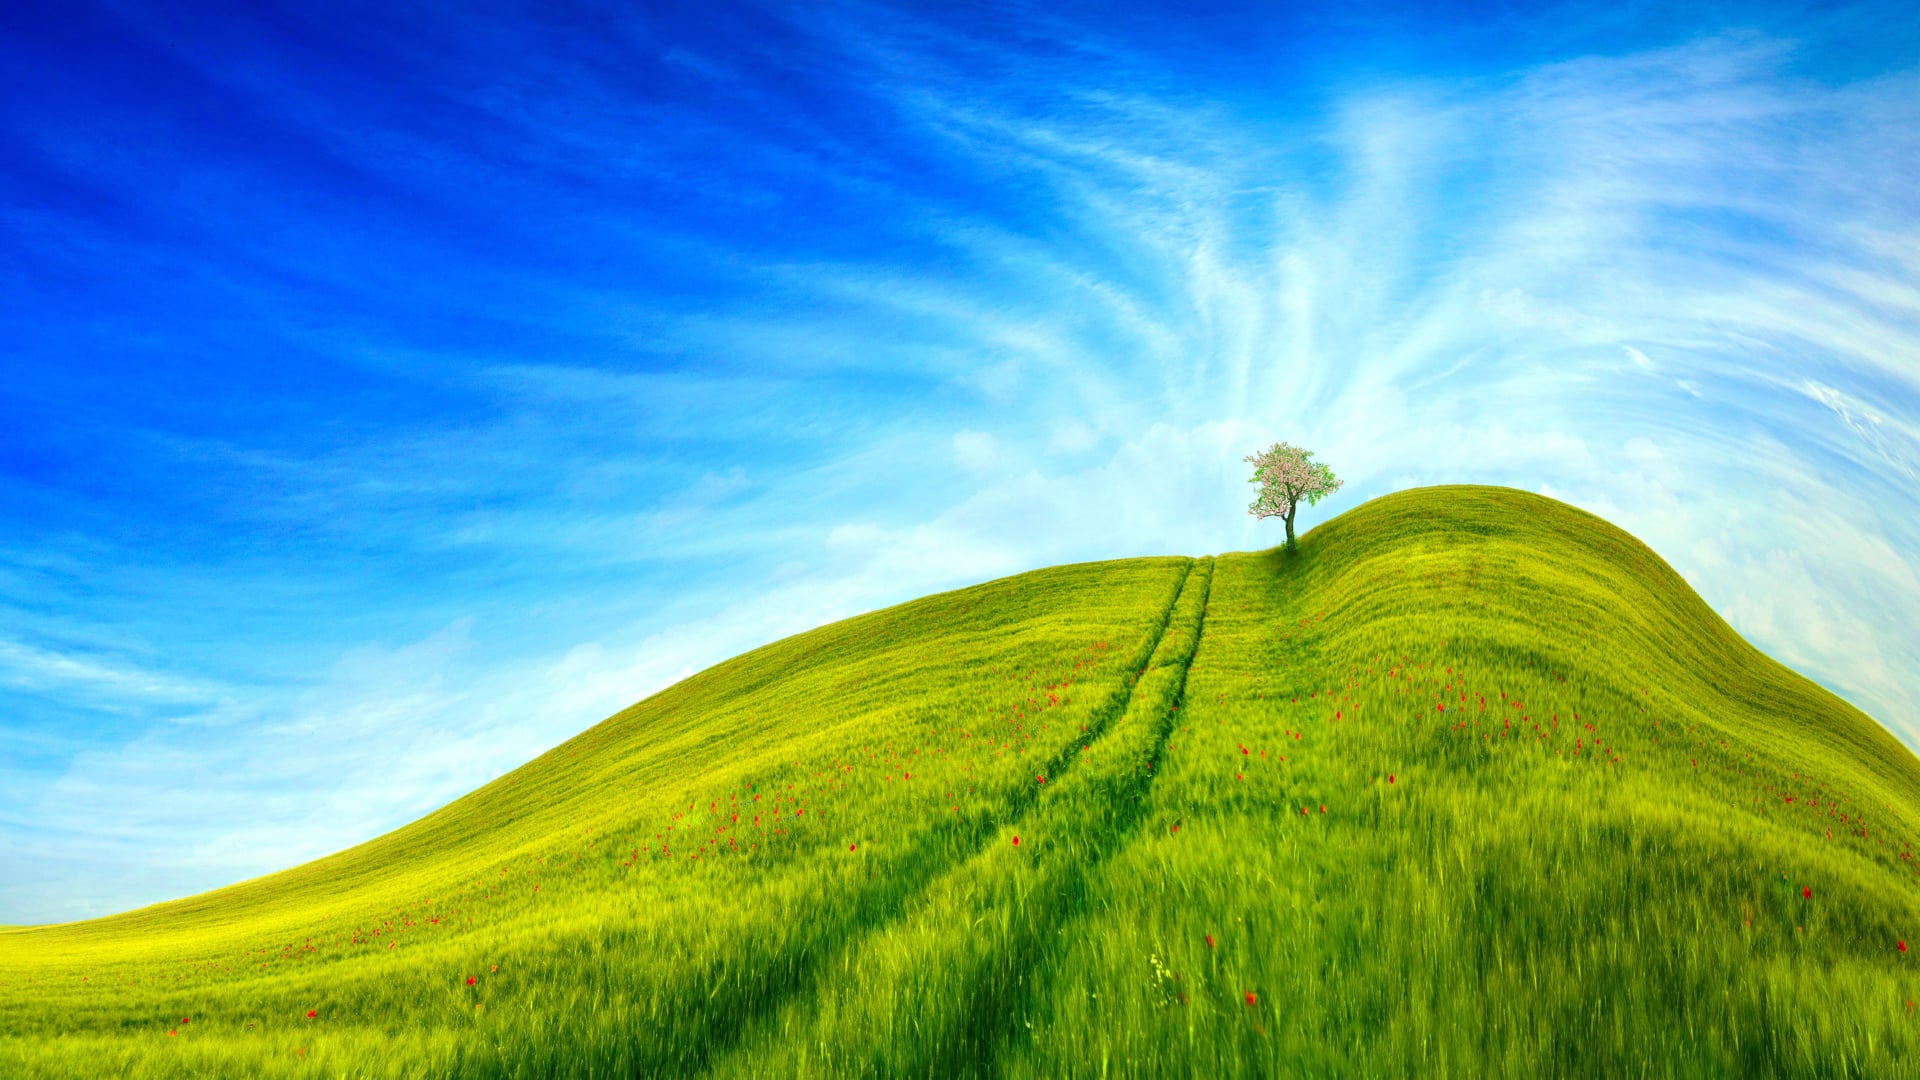 Grass Landscape wallpapers HD quality